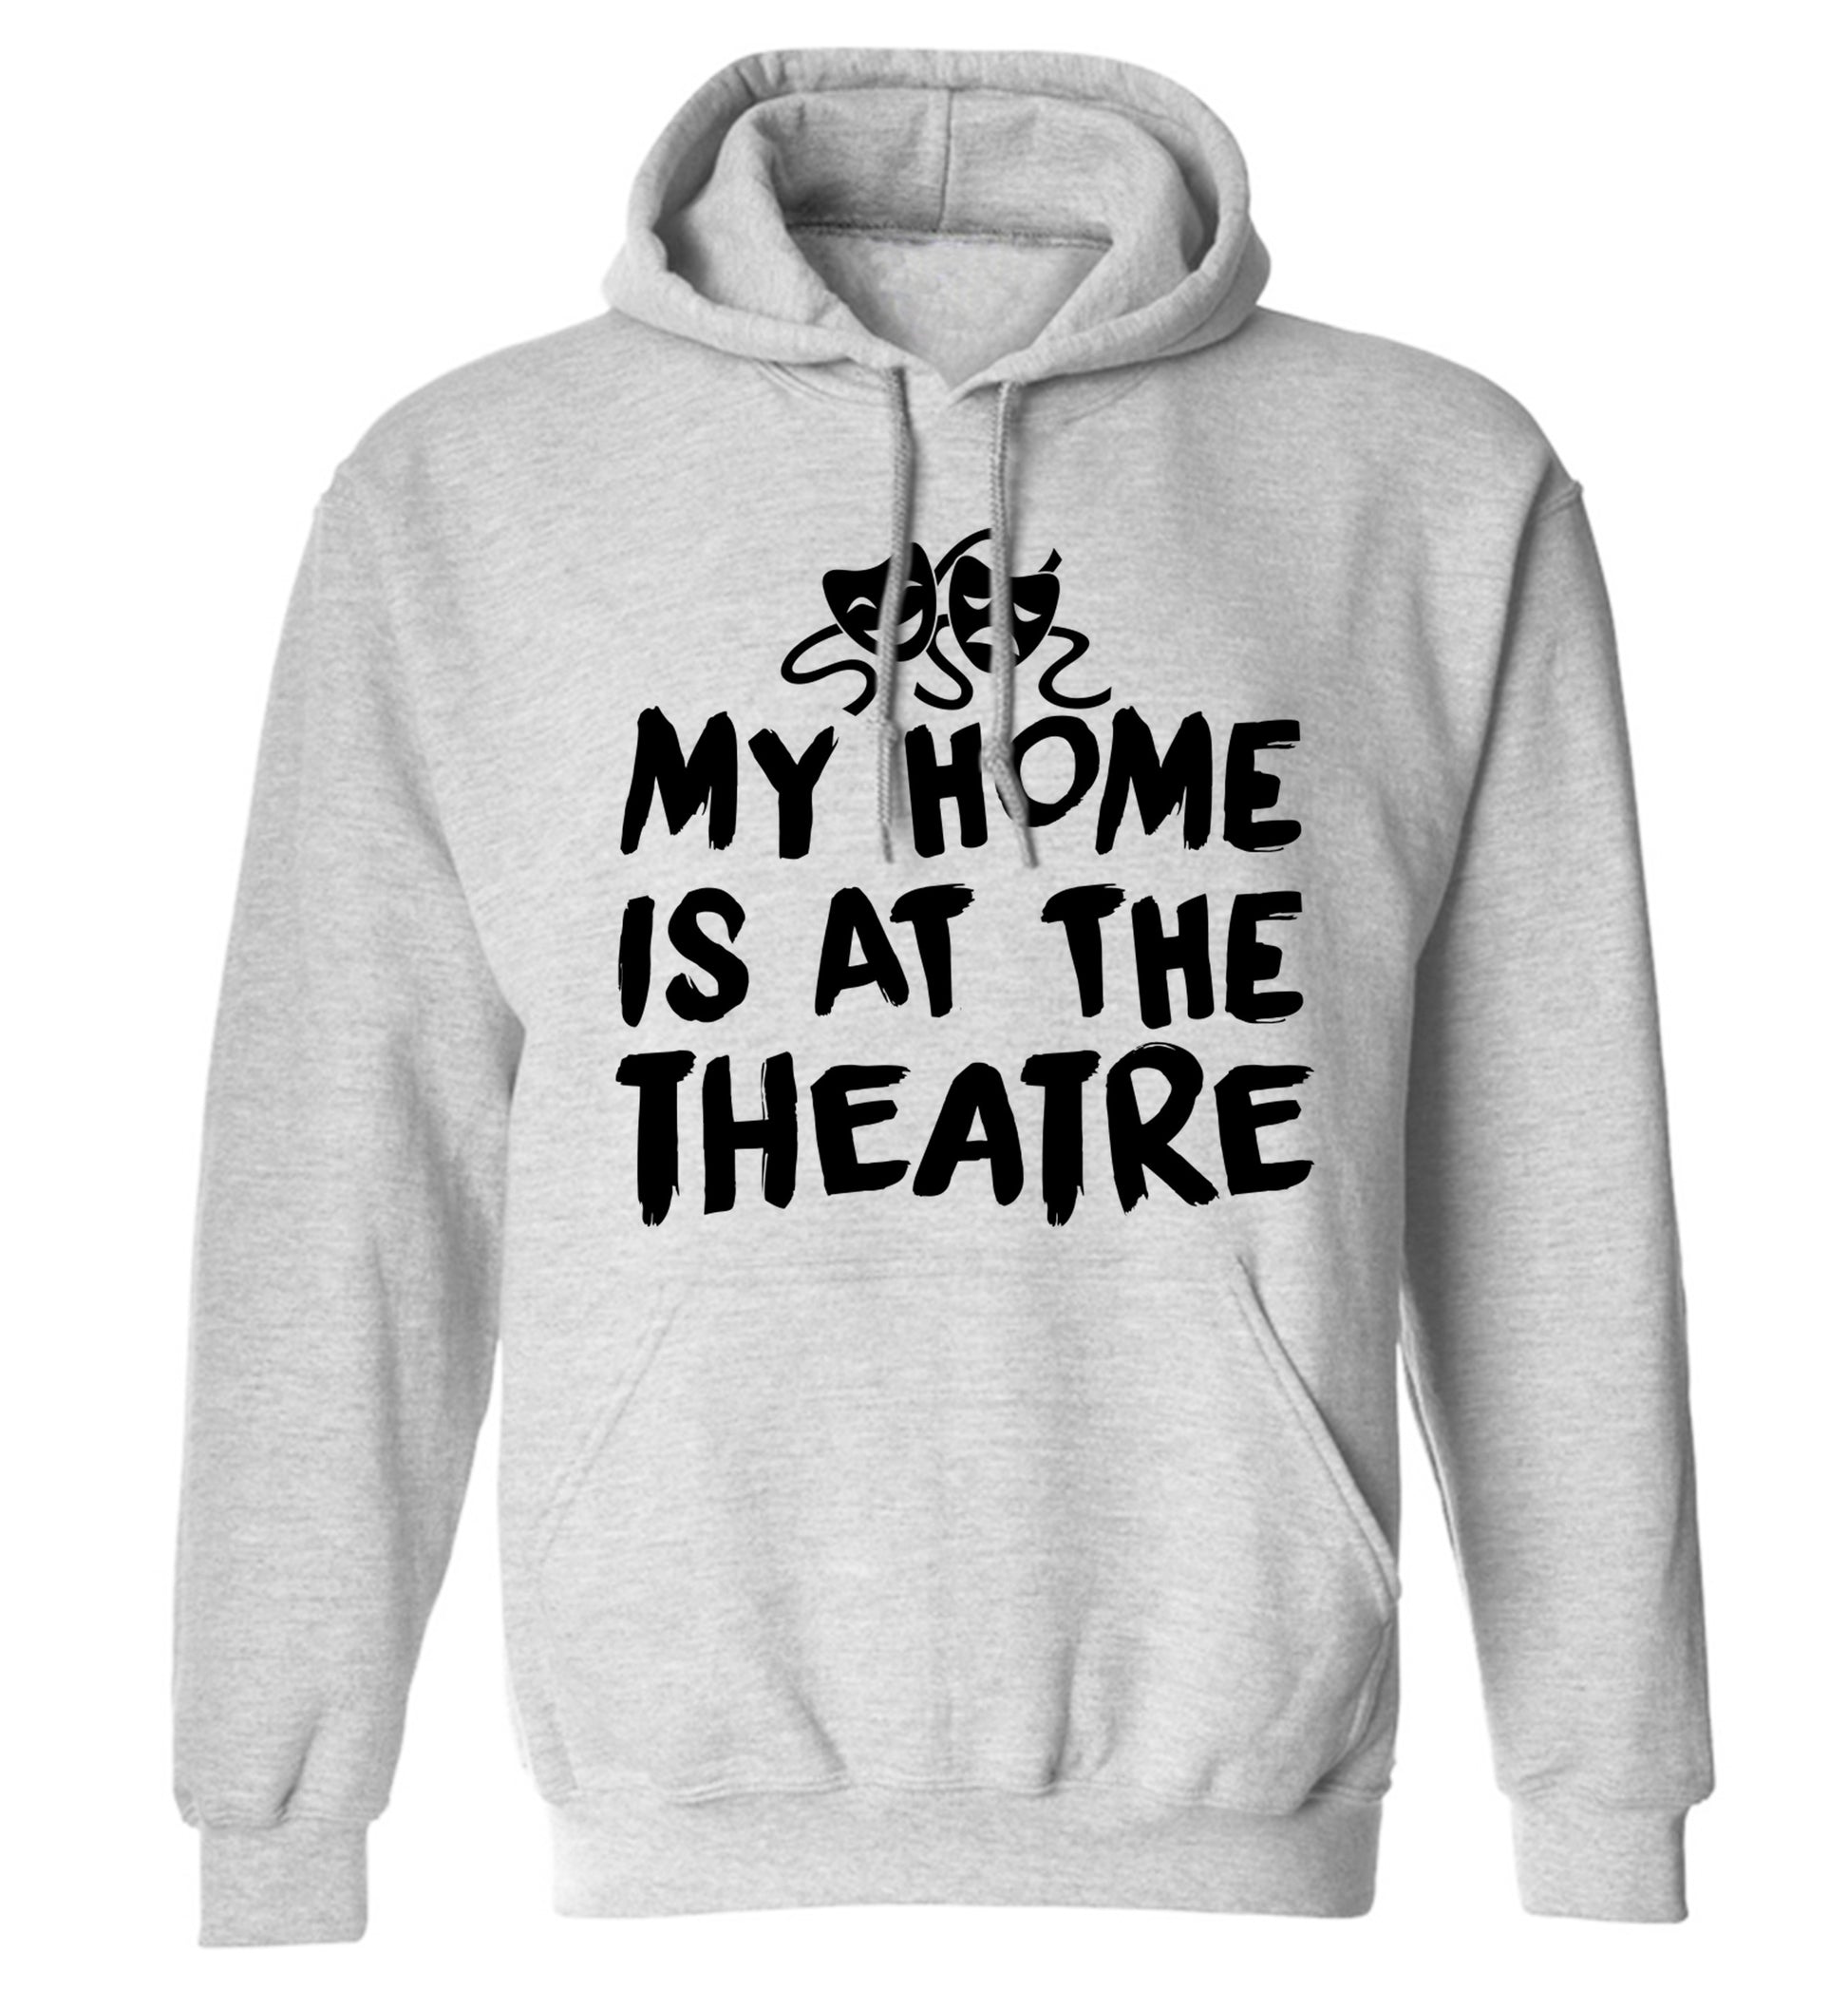 My home is at the theatre adults unisex grey hoodie 2XL